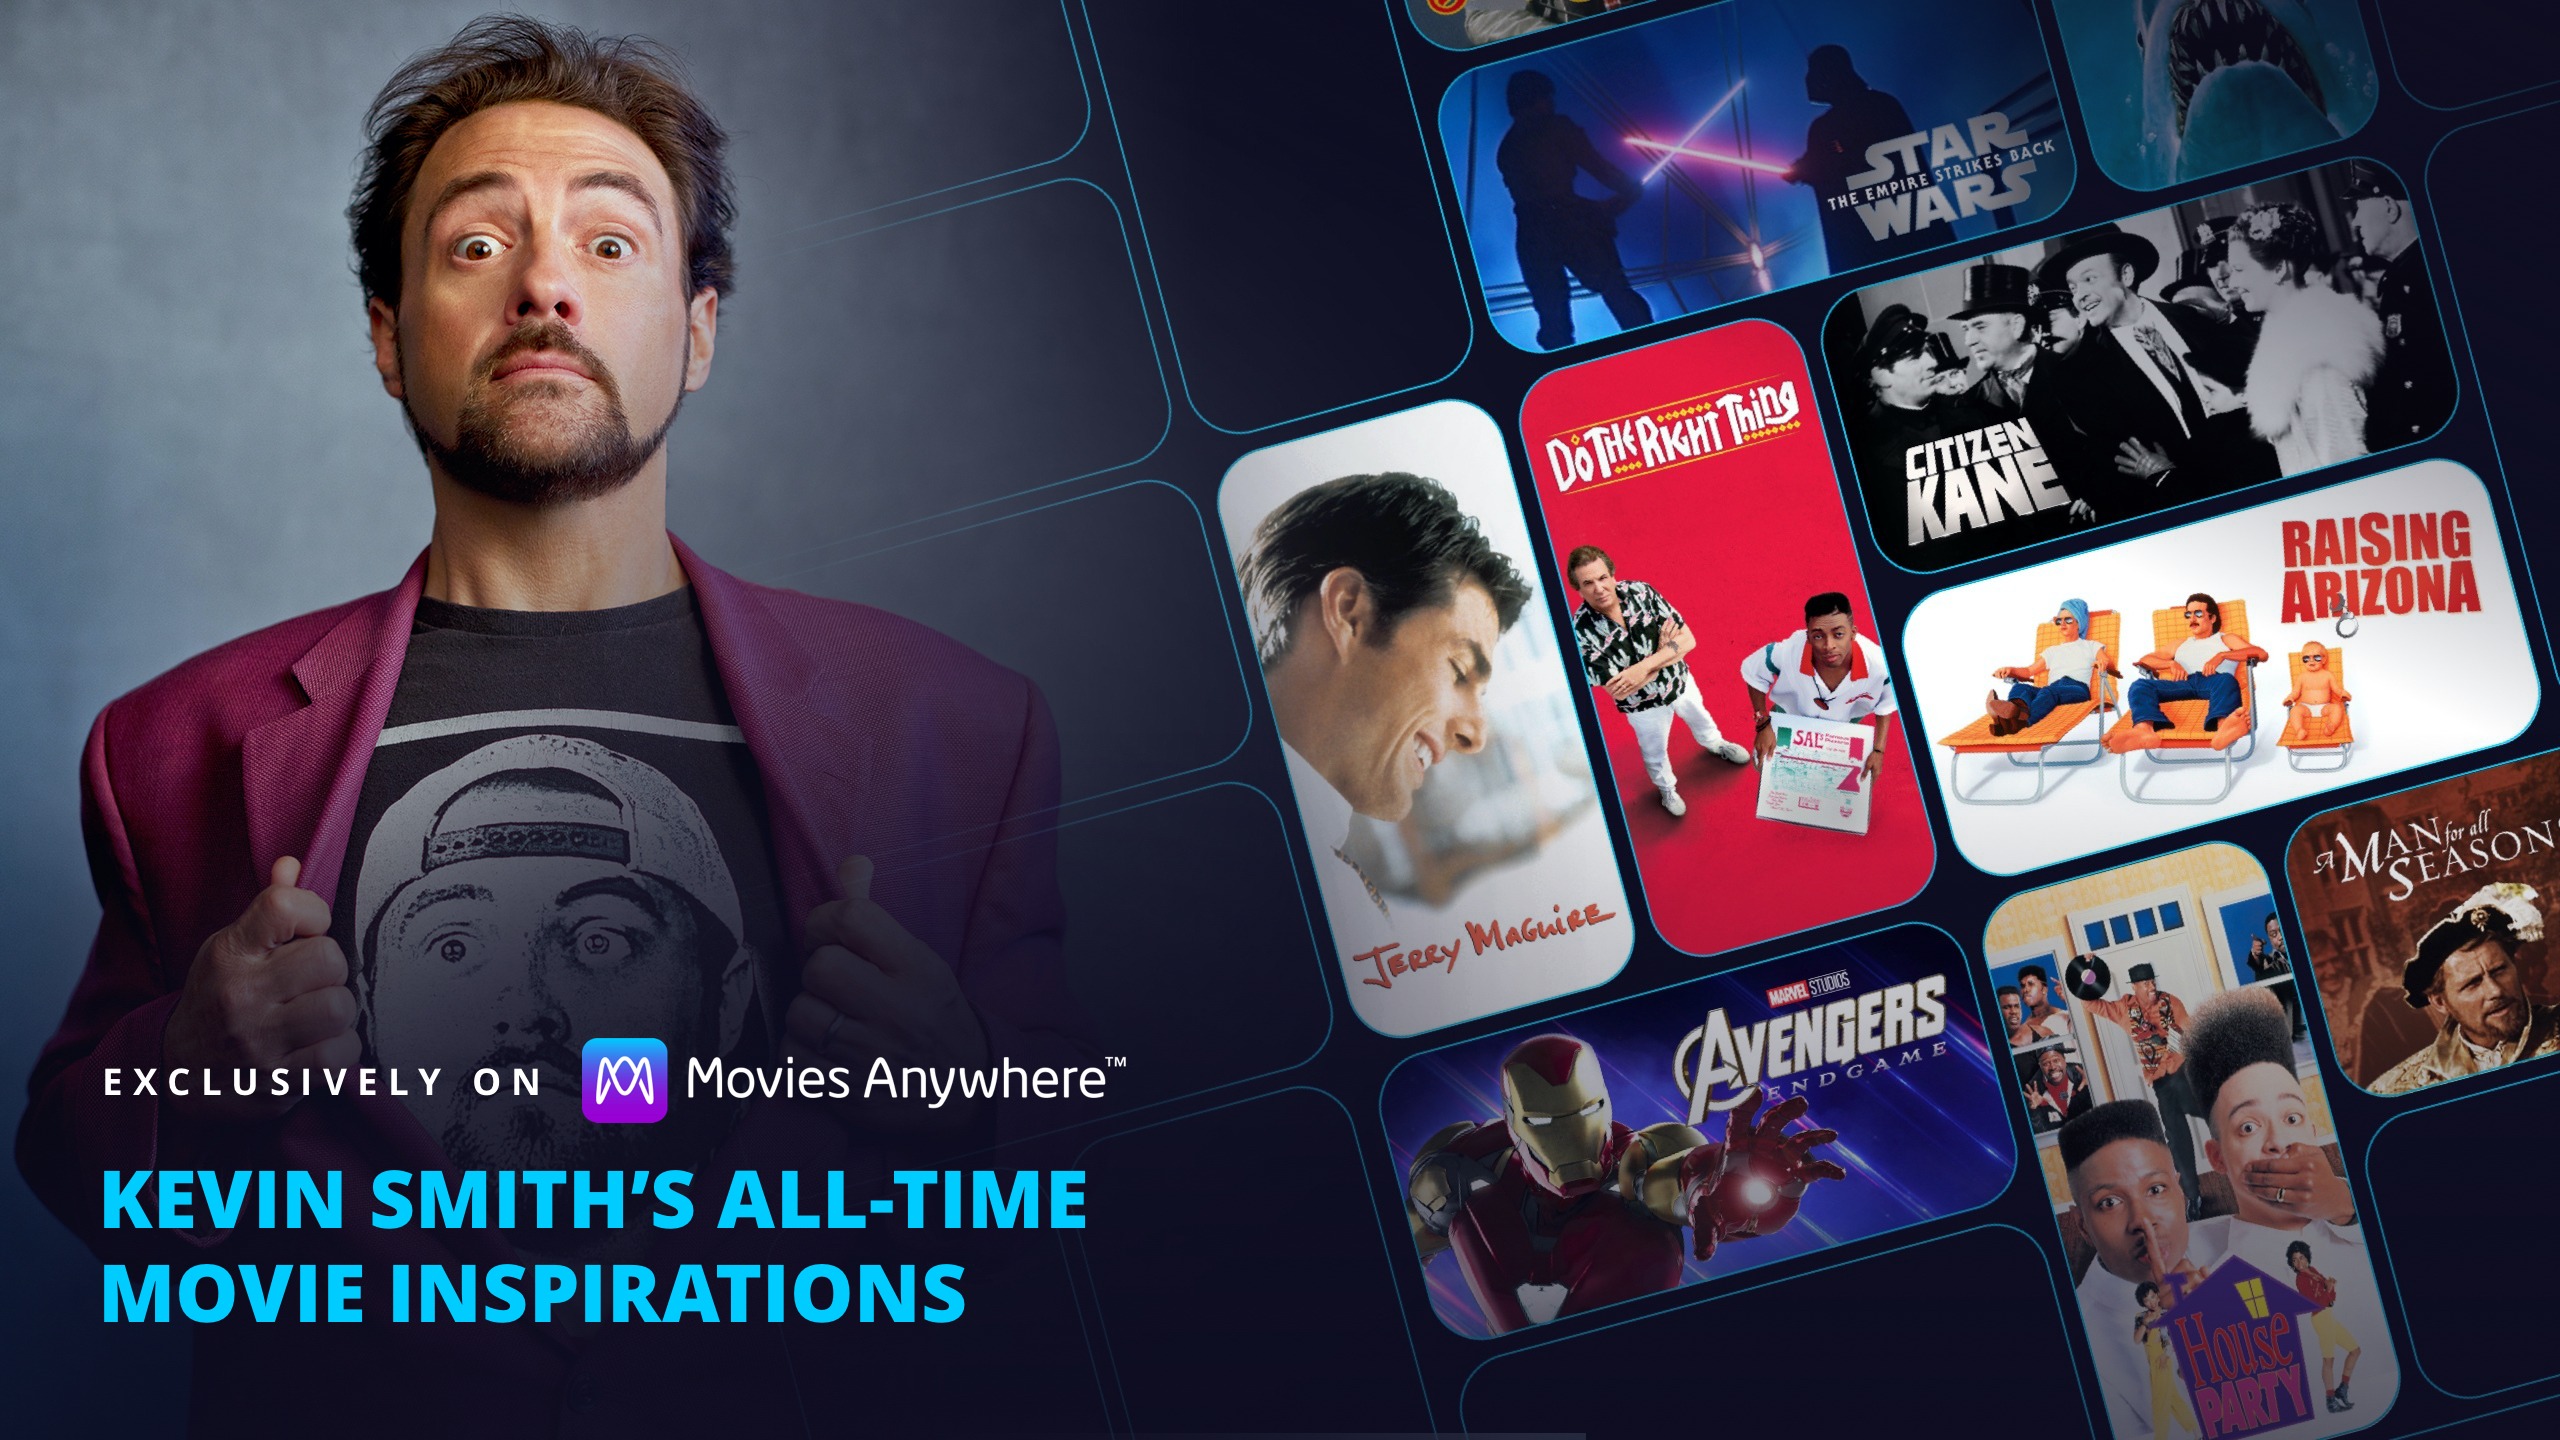 Movies Anywhere & Kevin Smith Team Up for Digital Movie Deals